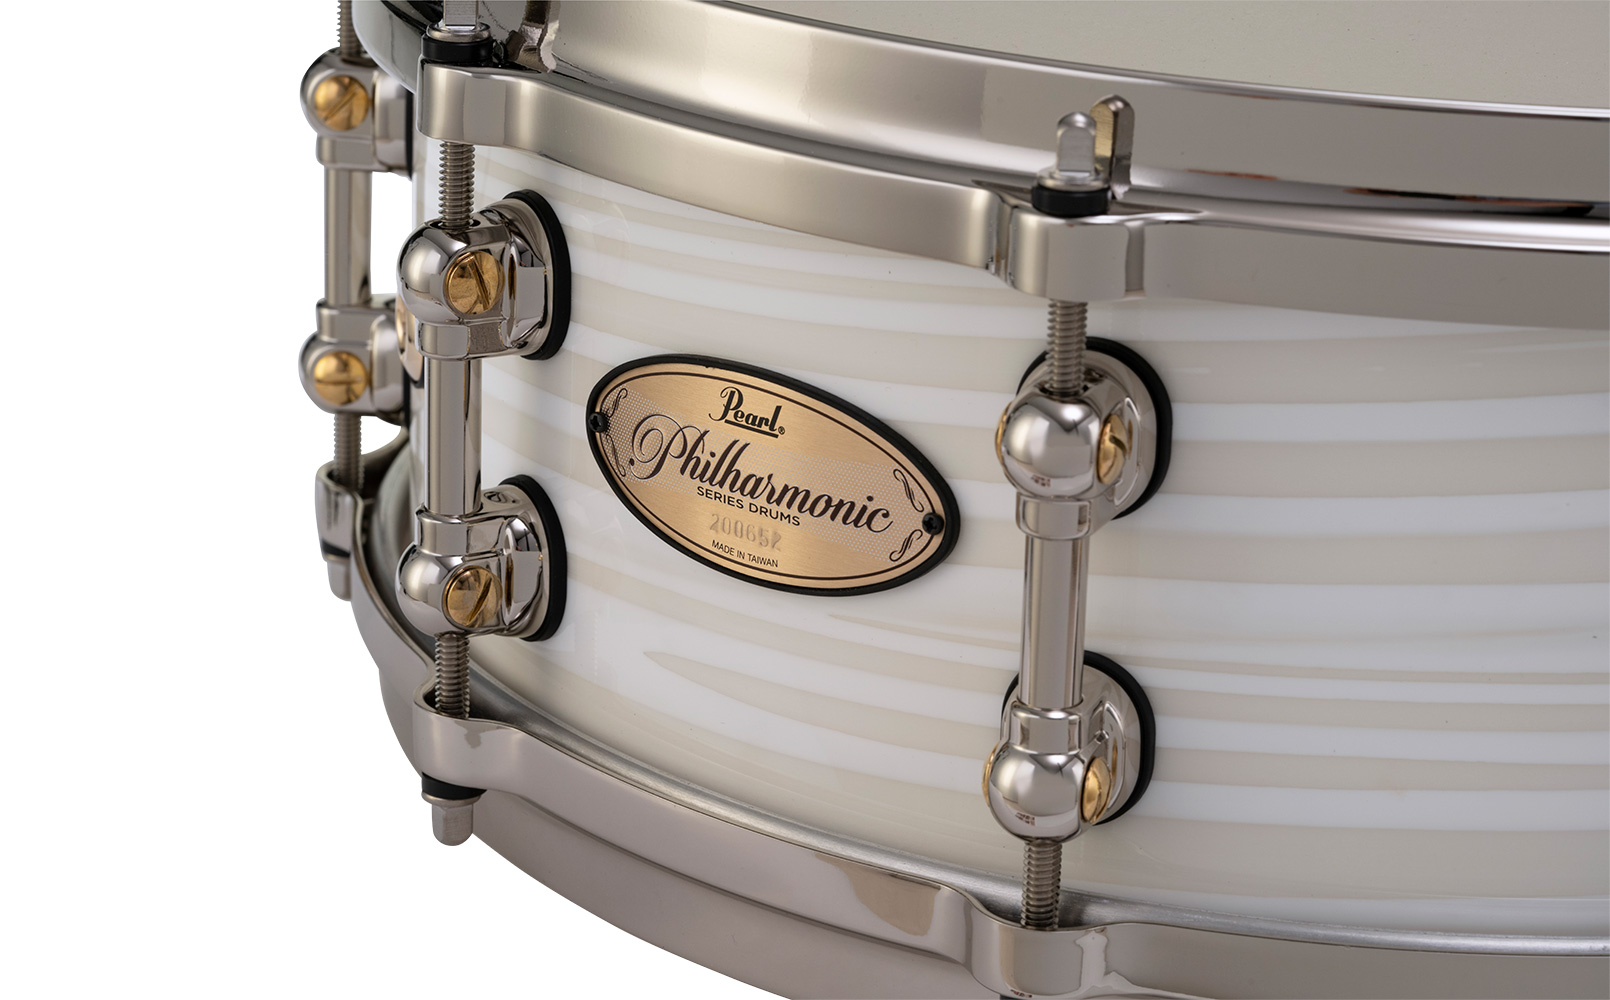 Pearl Philharmonic Snare Drum 5-inch x 14-inch - Gloss Barnwood Brown